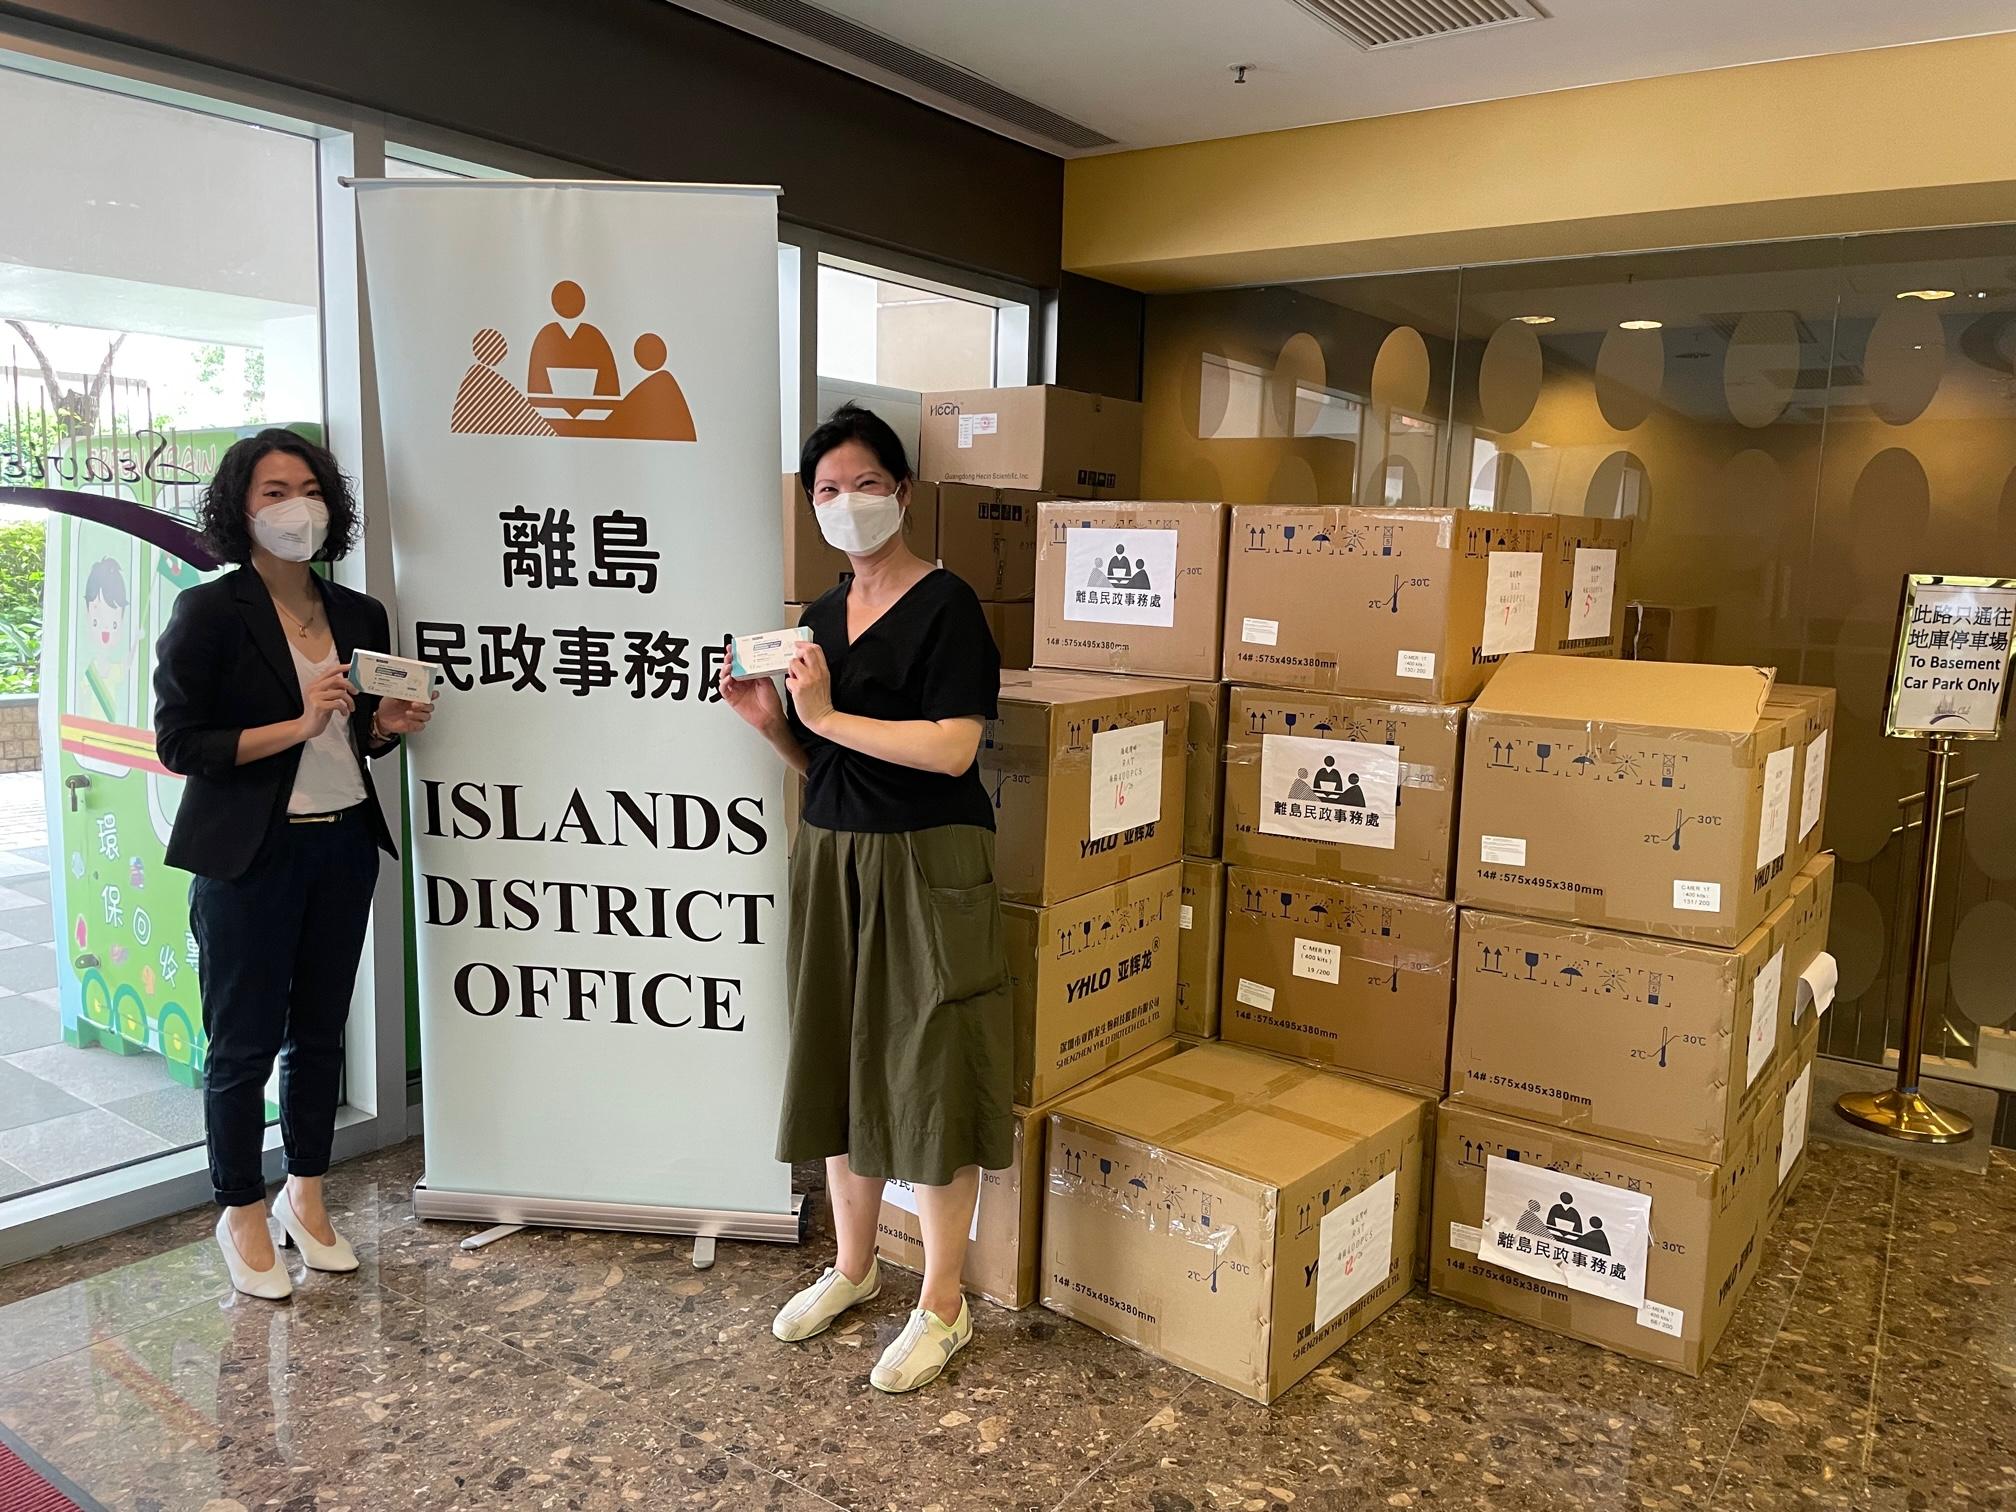 The Islands District Office today (June 7) distributed COVID-19 rapid test kits to households, cleansing workers and property management staff living and working in Seaview Crescent for voluntary testing through the property management company.